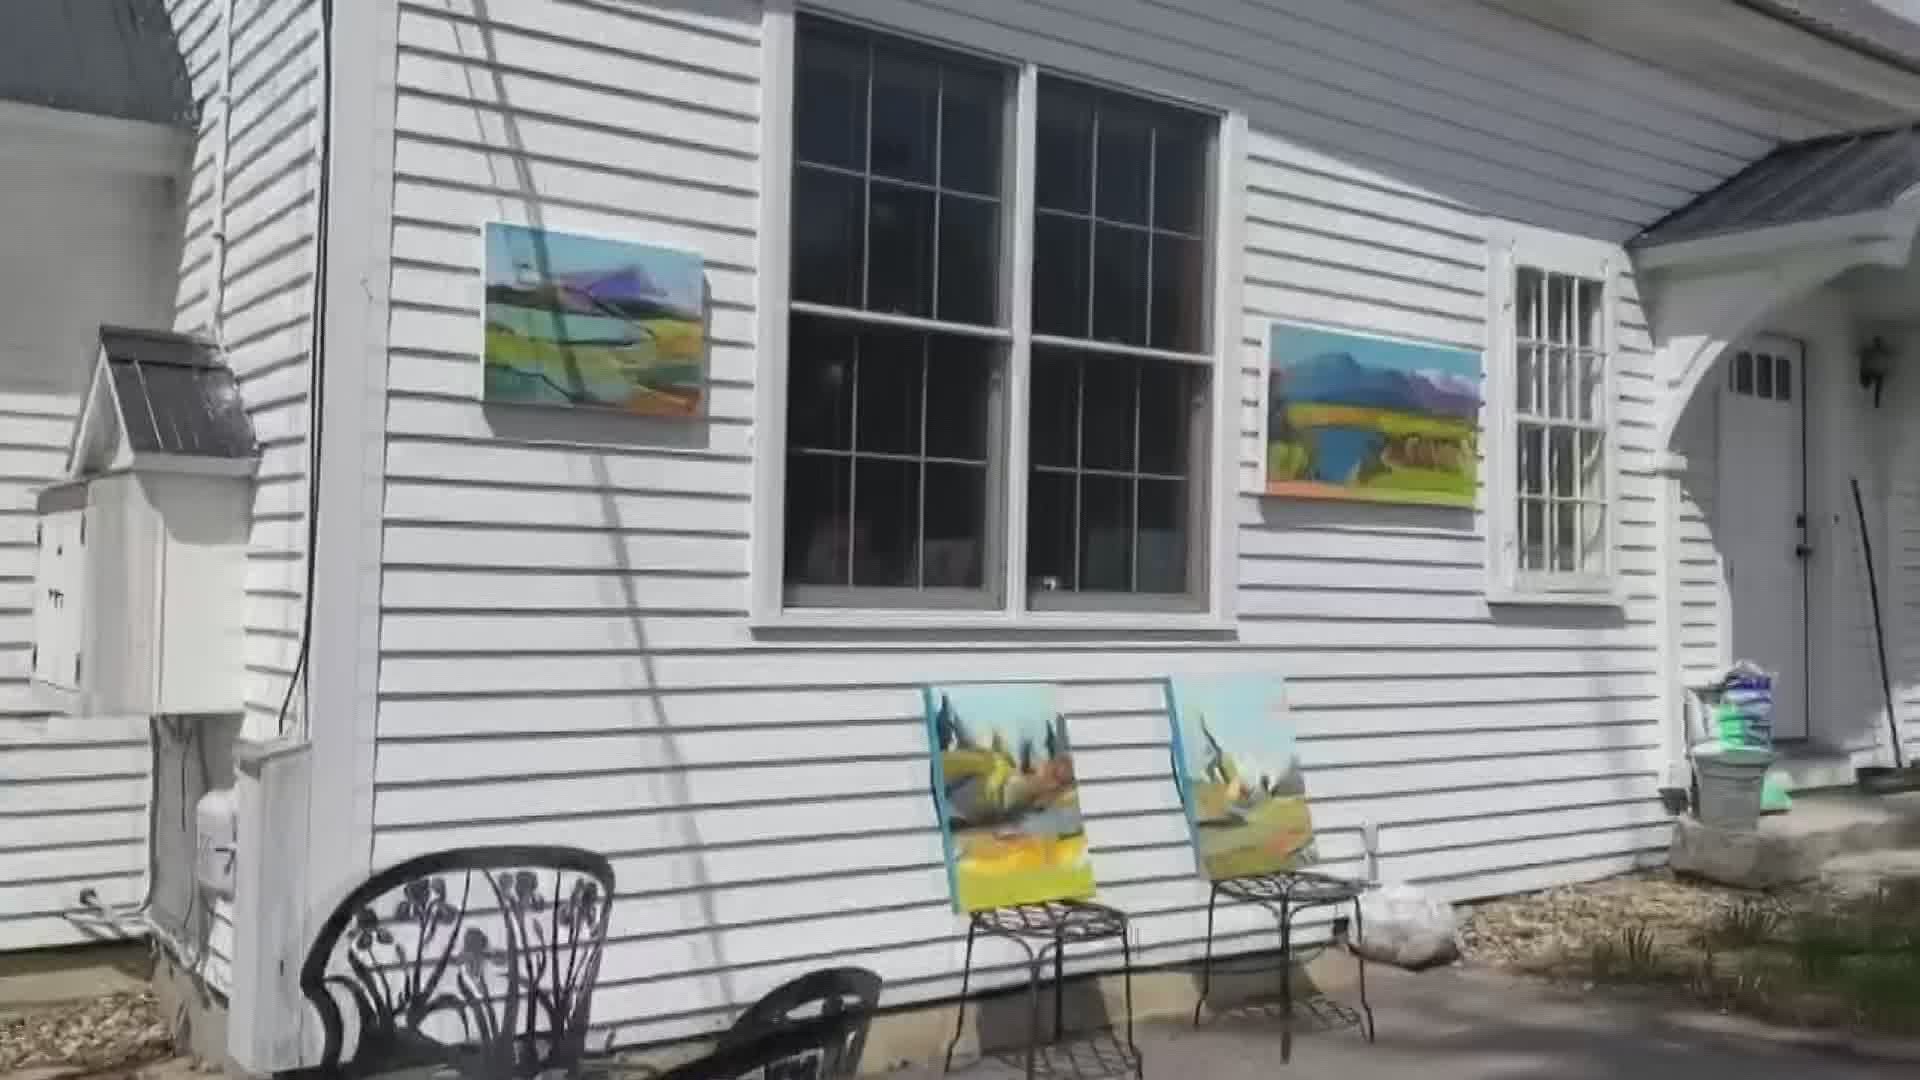 Harvest Gold Gallery in Lovell set up a drive-thru art gallery.